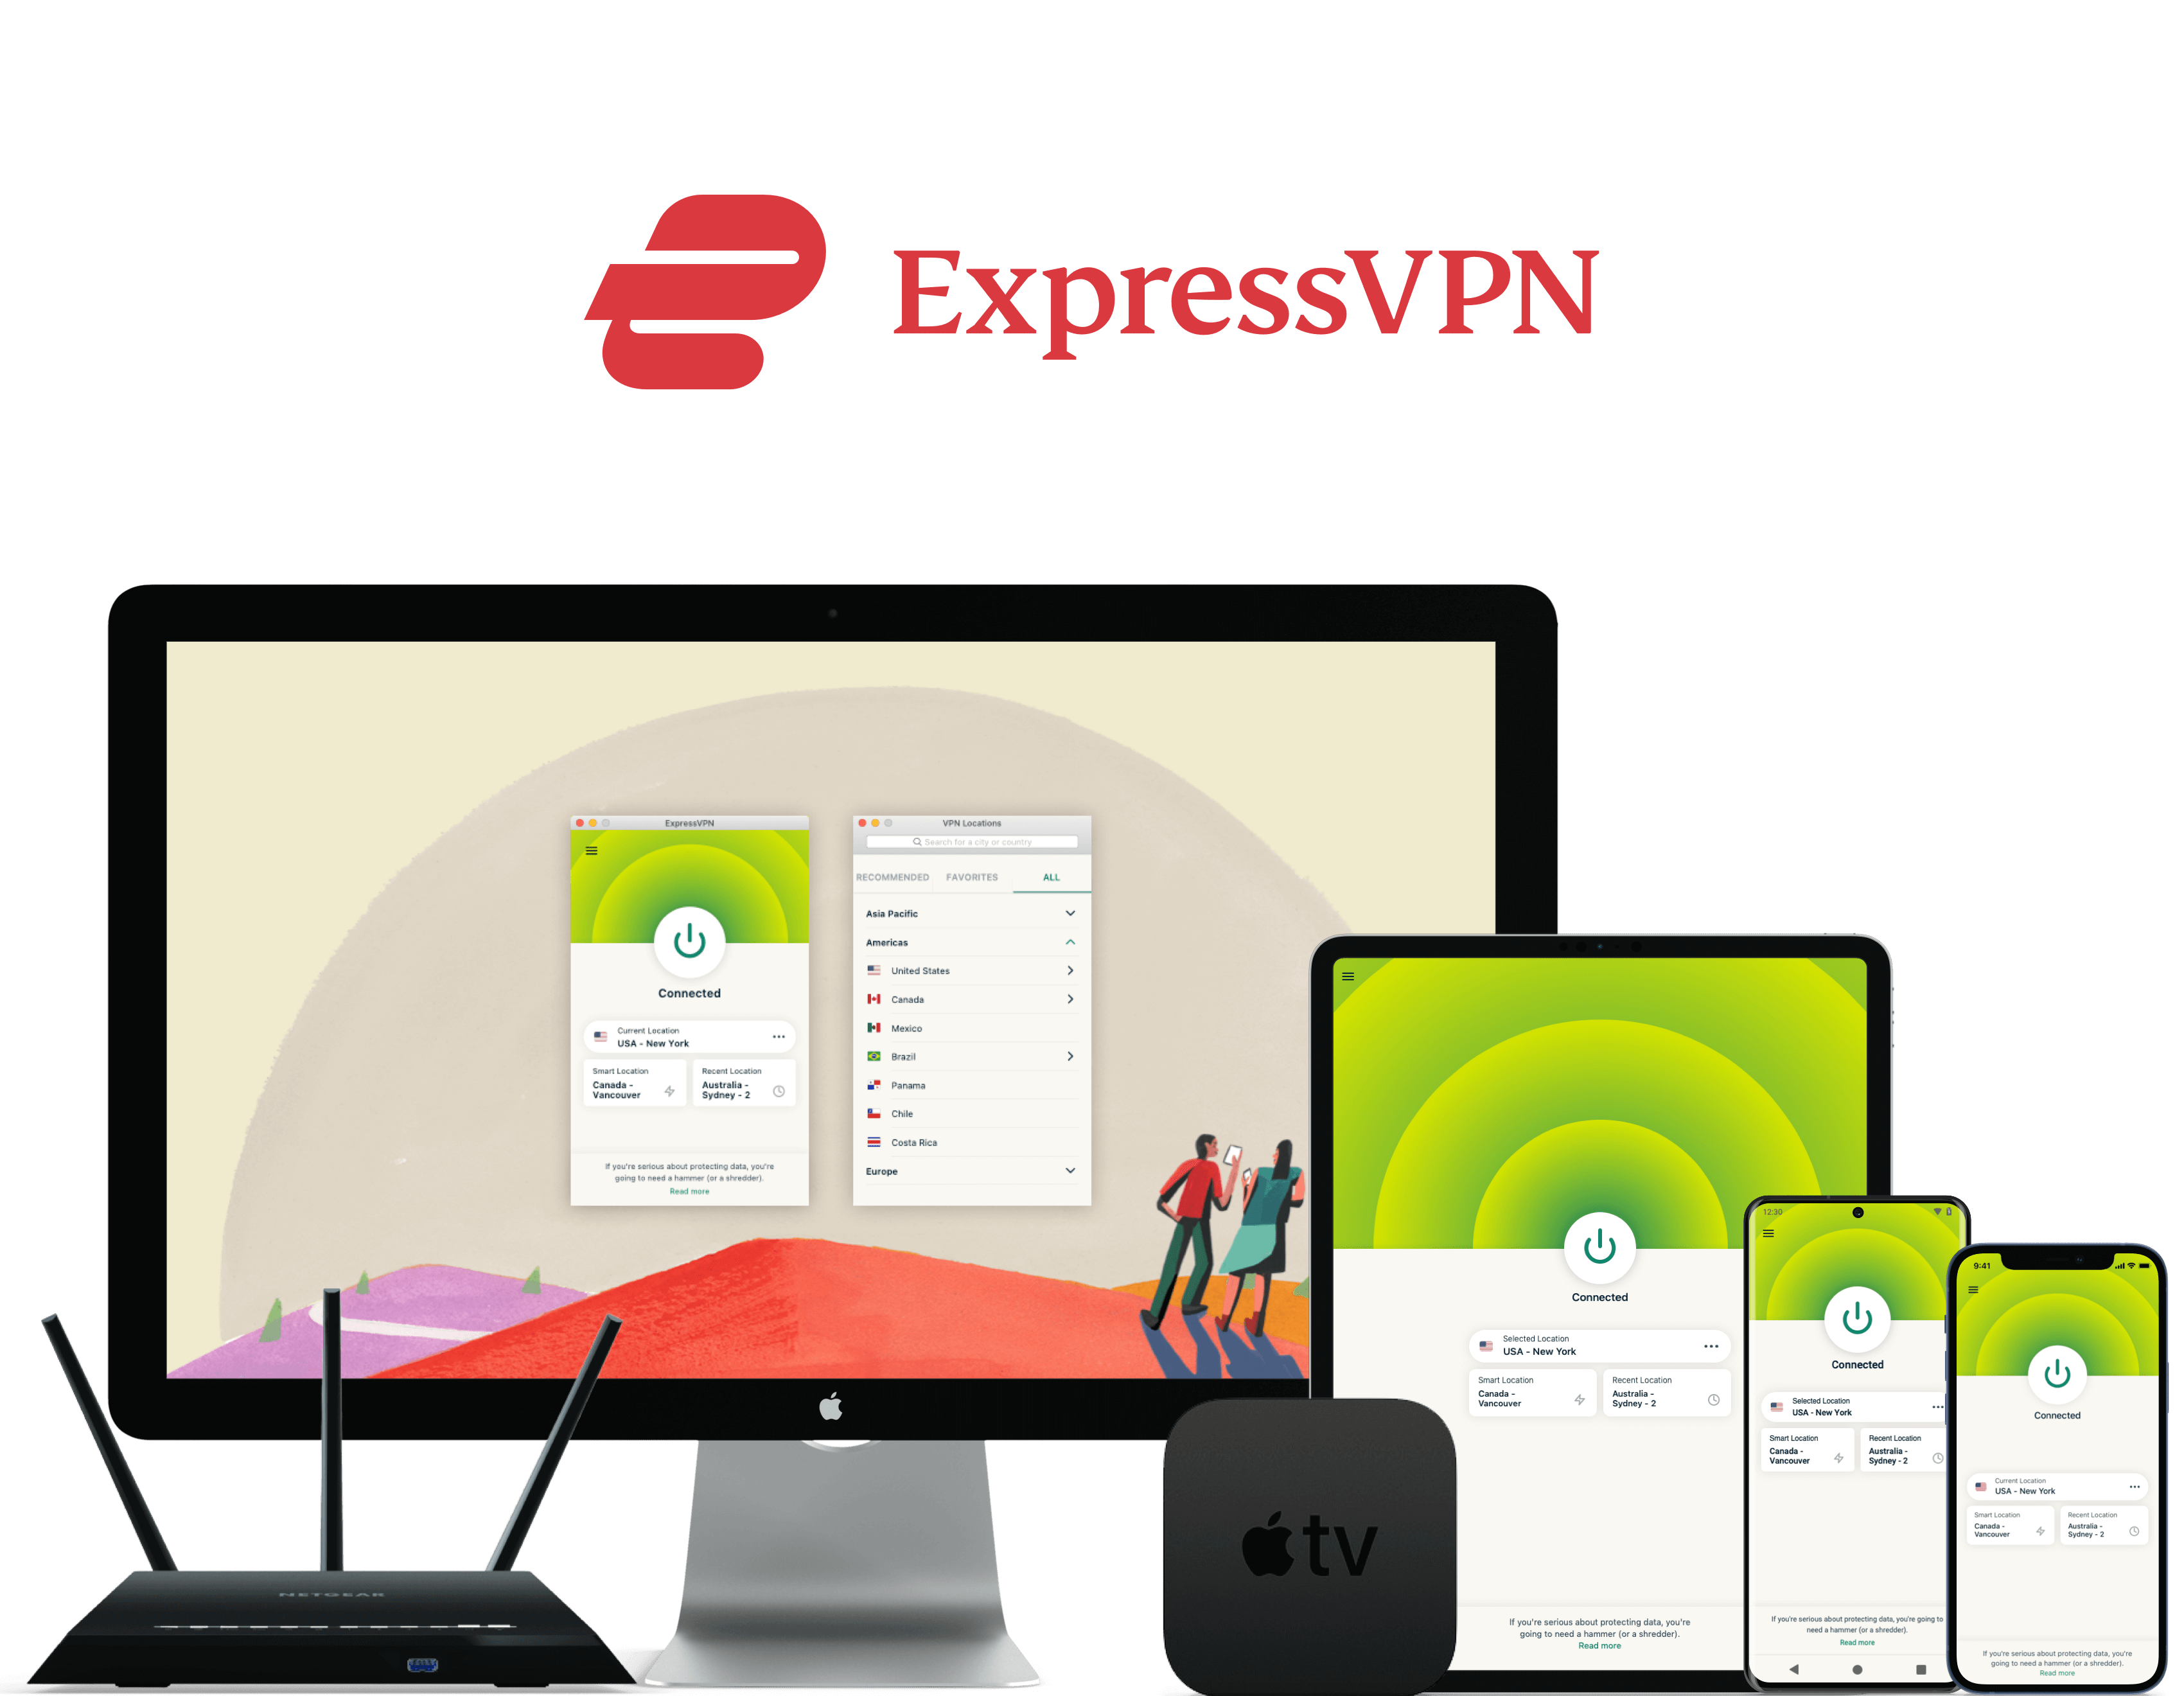 ExpressVPN - Apps on all devices